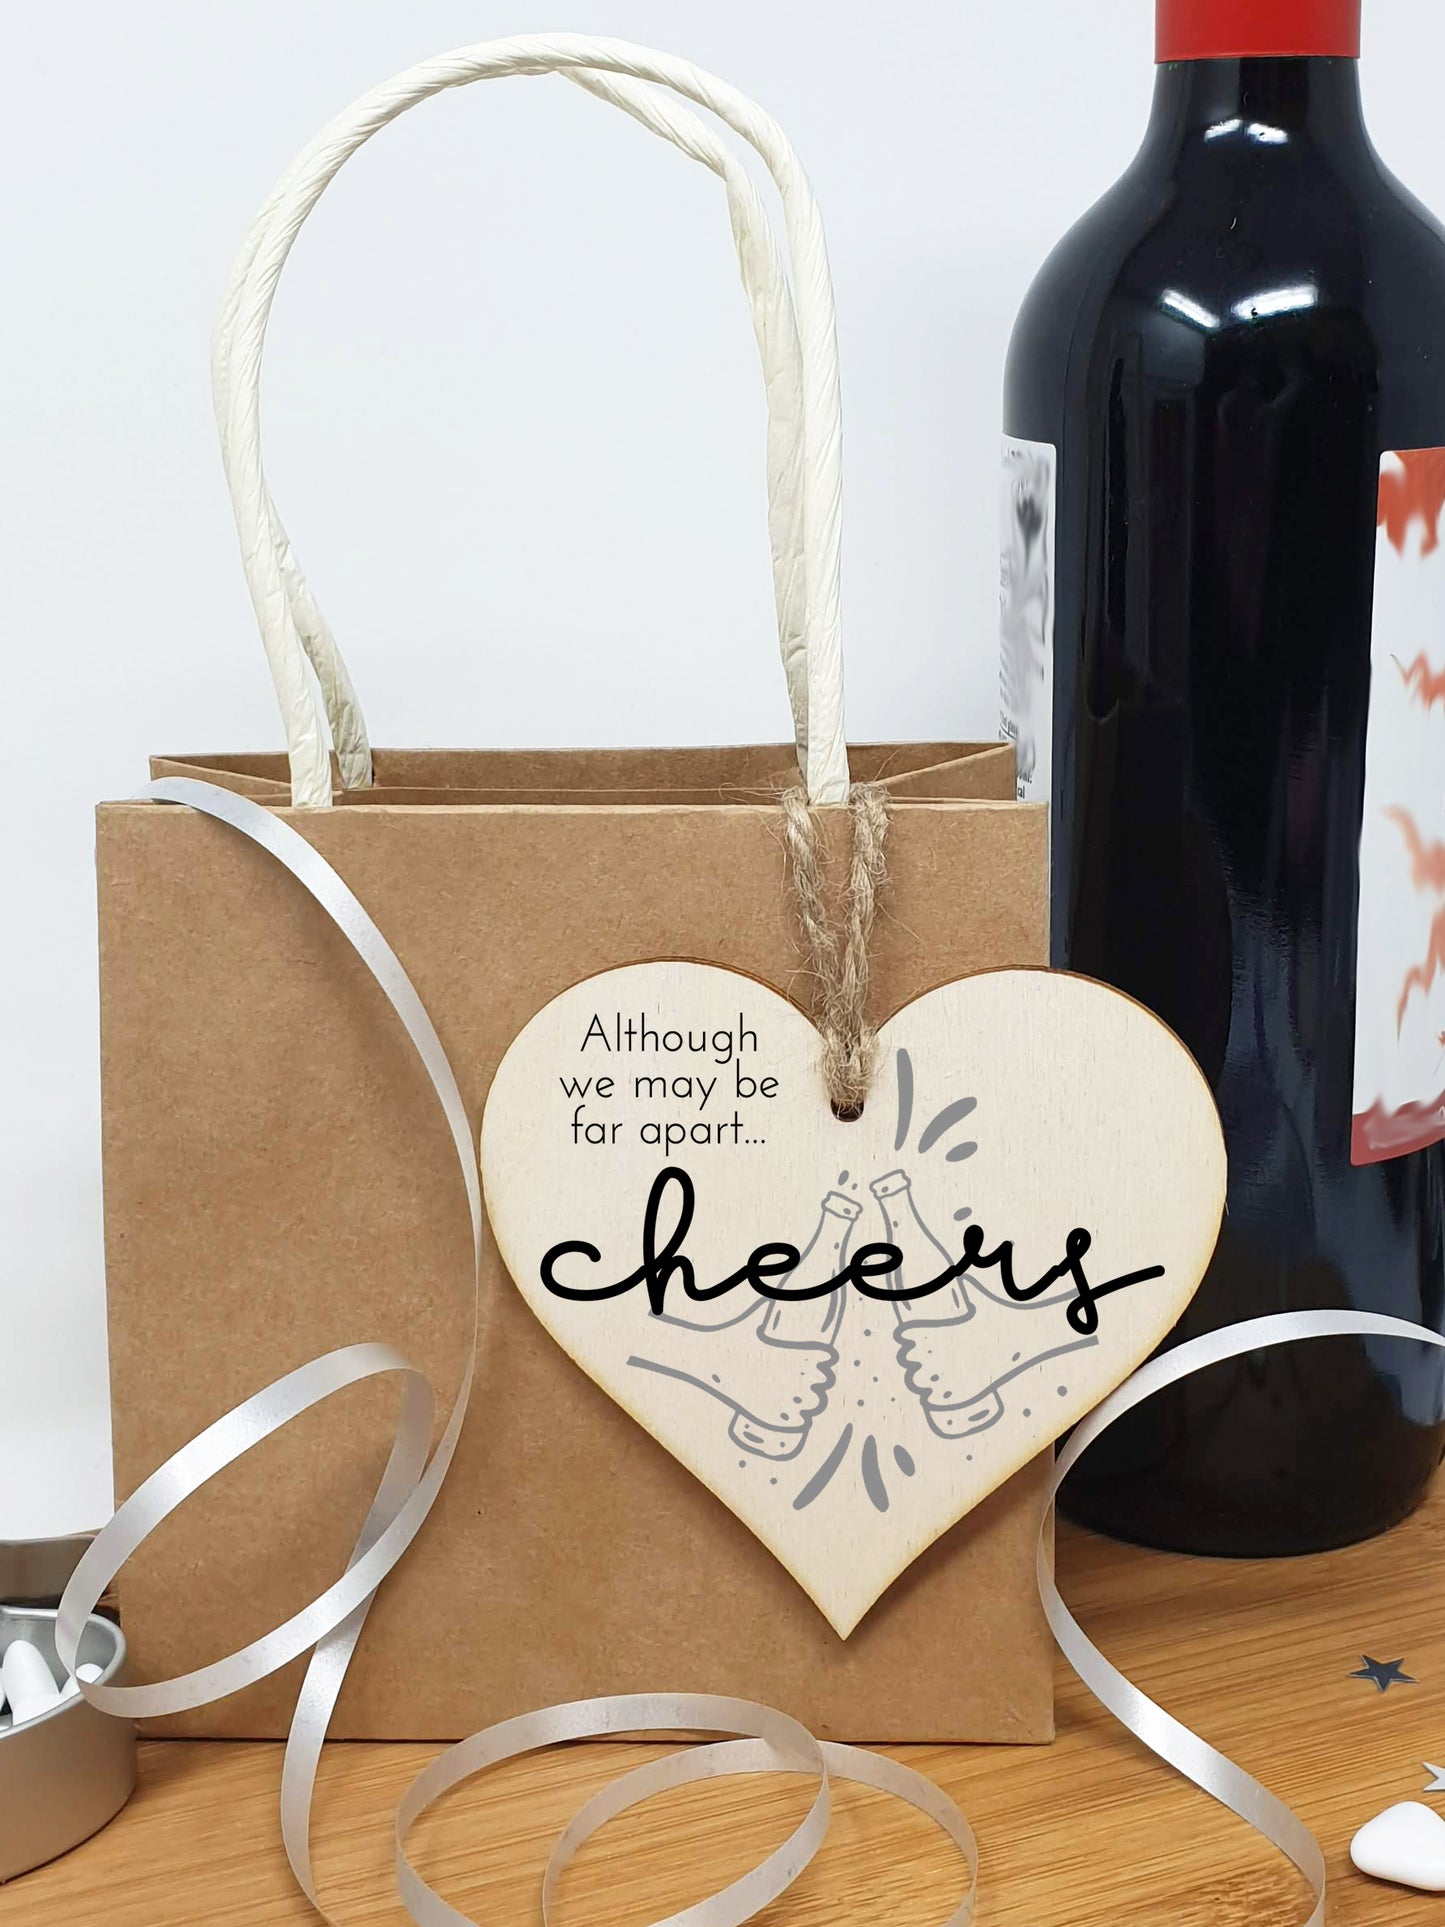 Handmade Wooden Hanging Heart Plaque Gift Although we may be far apart cheers novelty window wall hanger gift for absent friends and family funny keepsake sending well wishes and cheers